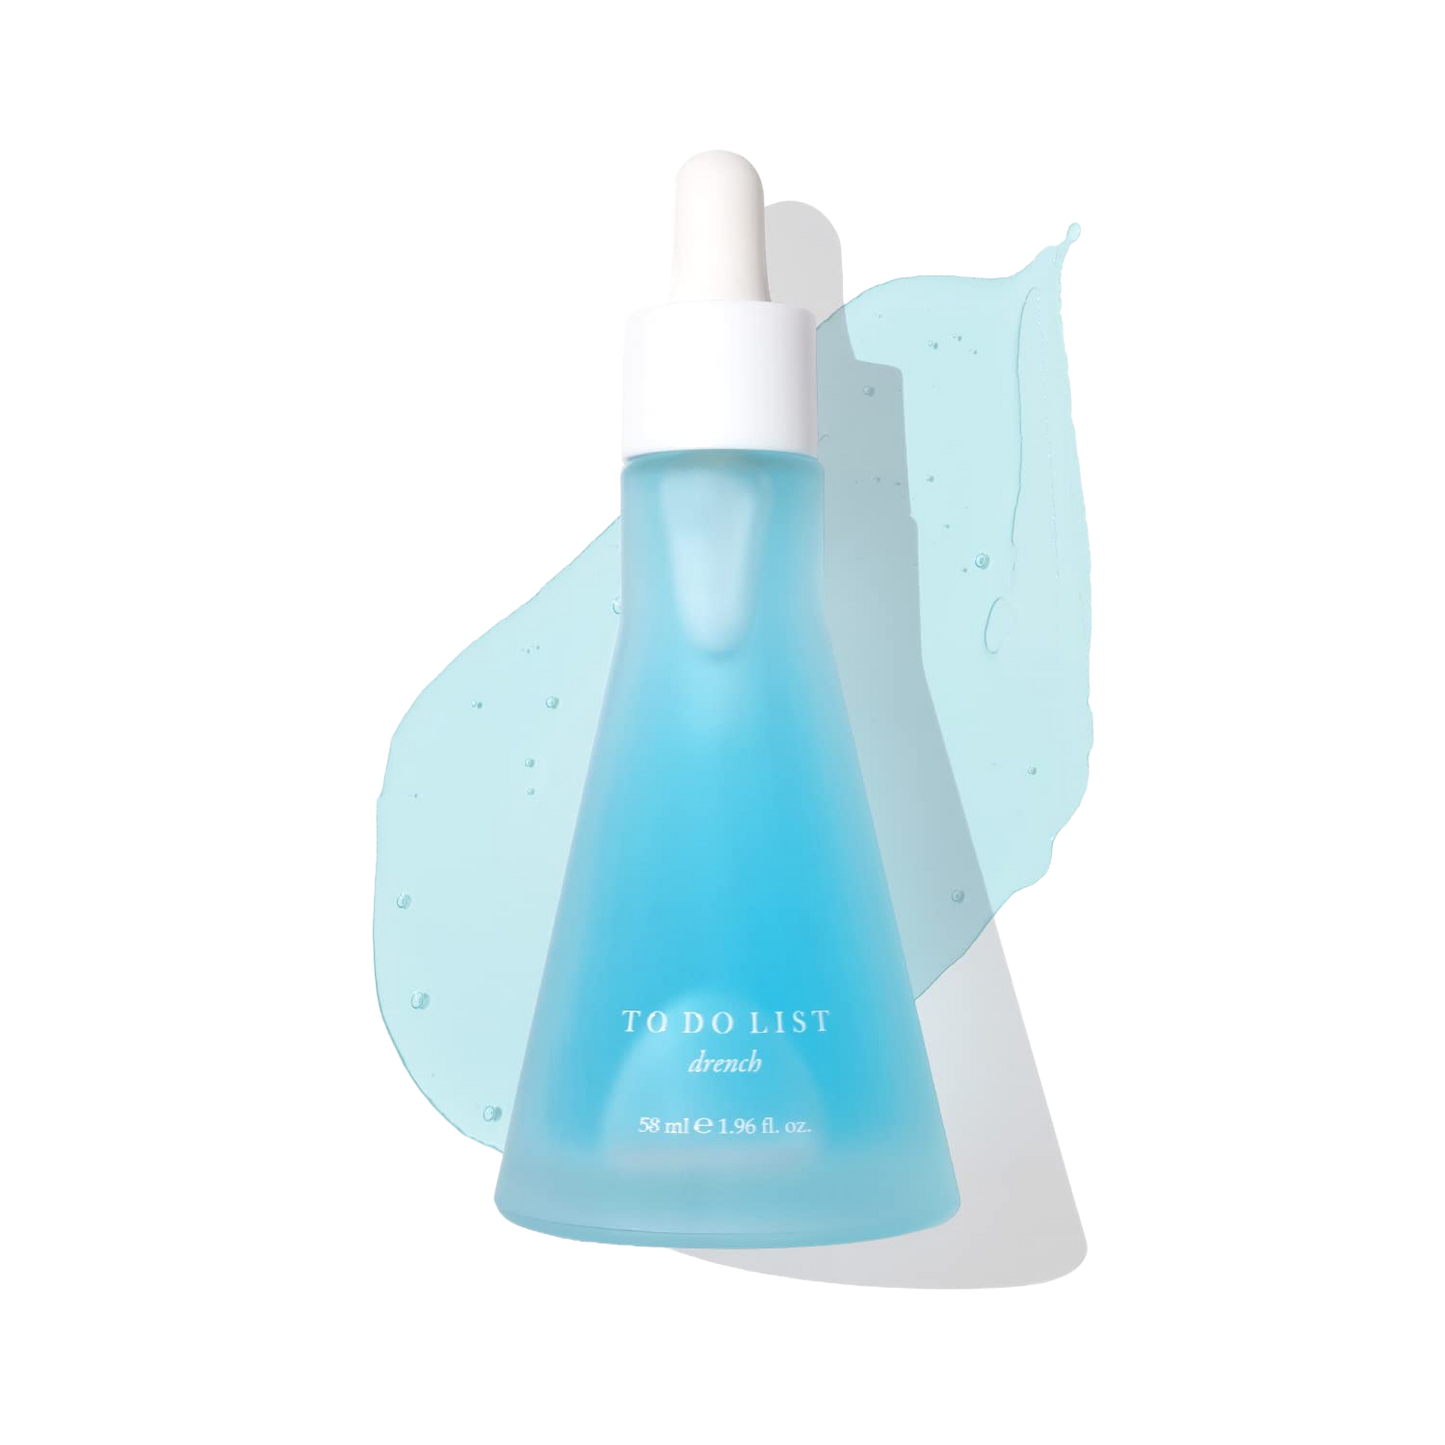 [To Do List] Face Serum Drench 58ml